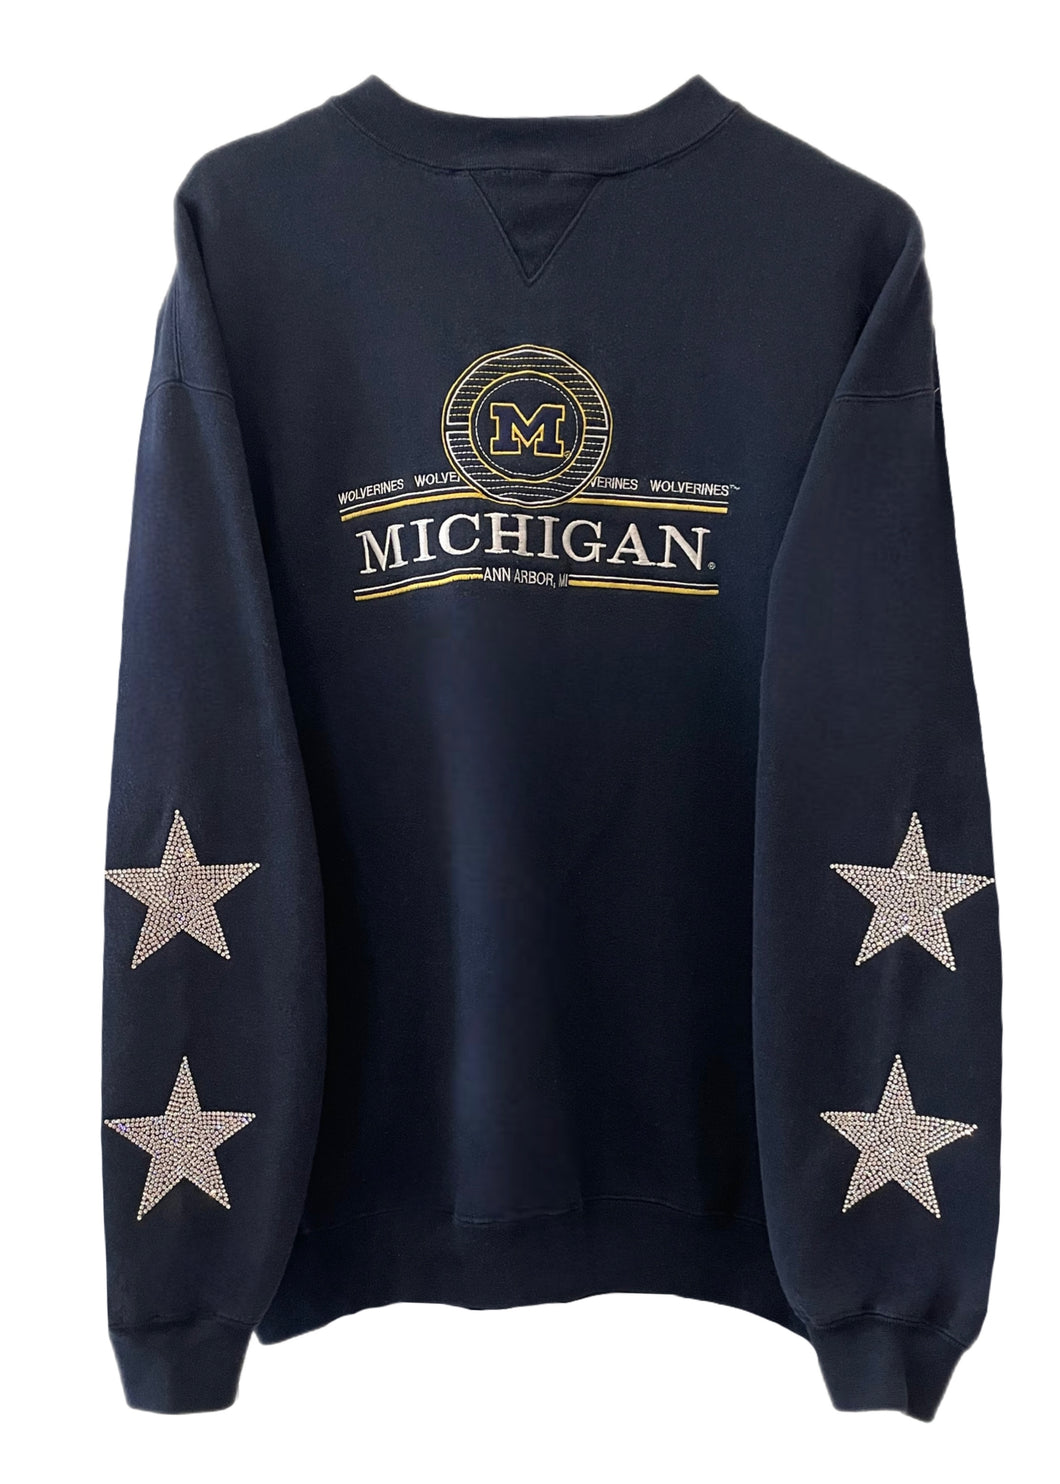 Michigan University, One of a KIND Vintage Sweatshirt with Crystal Star Design